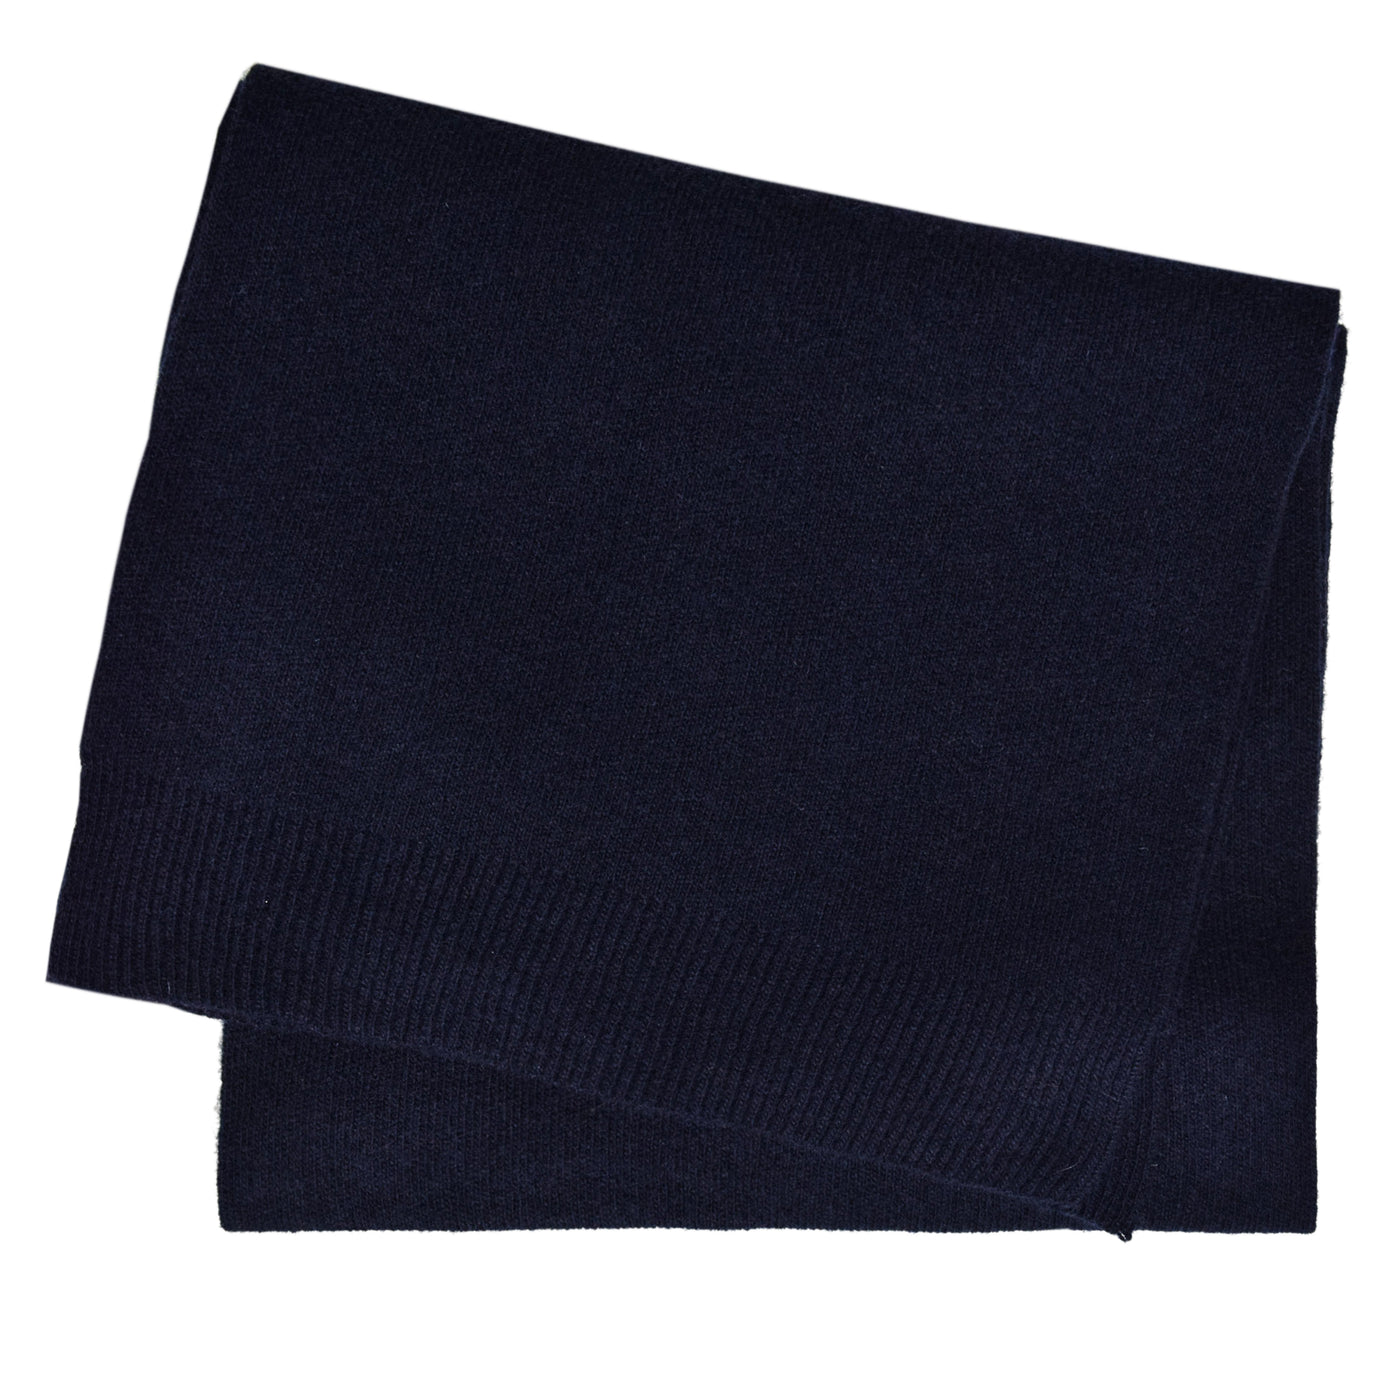 Colorful Standard Classic Organic Cotton Scarf Navy Blue frontColorful Standard Merino Wool Unisex Scarf Navy Blue FRONT